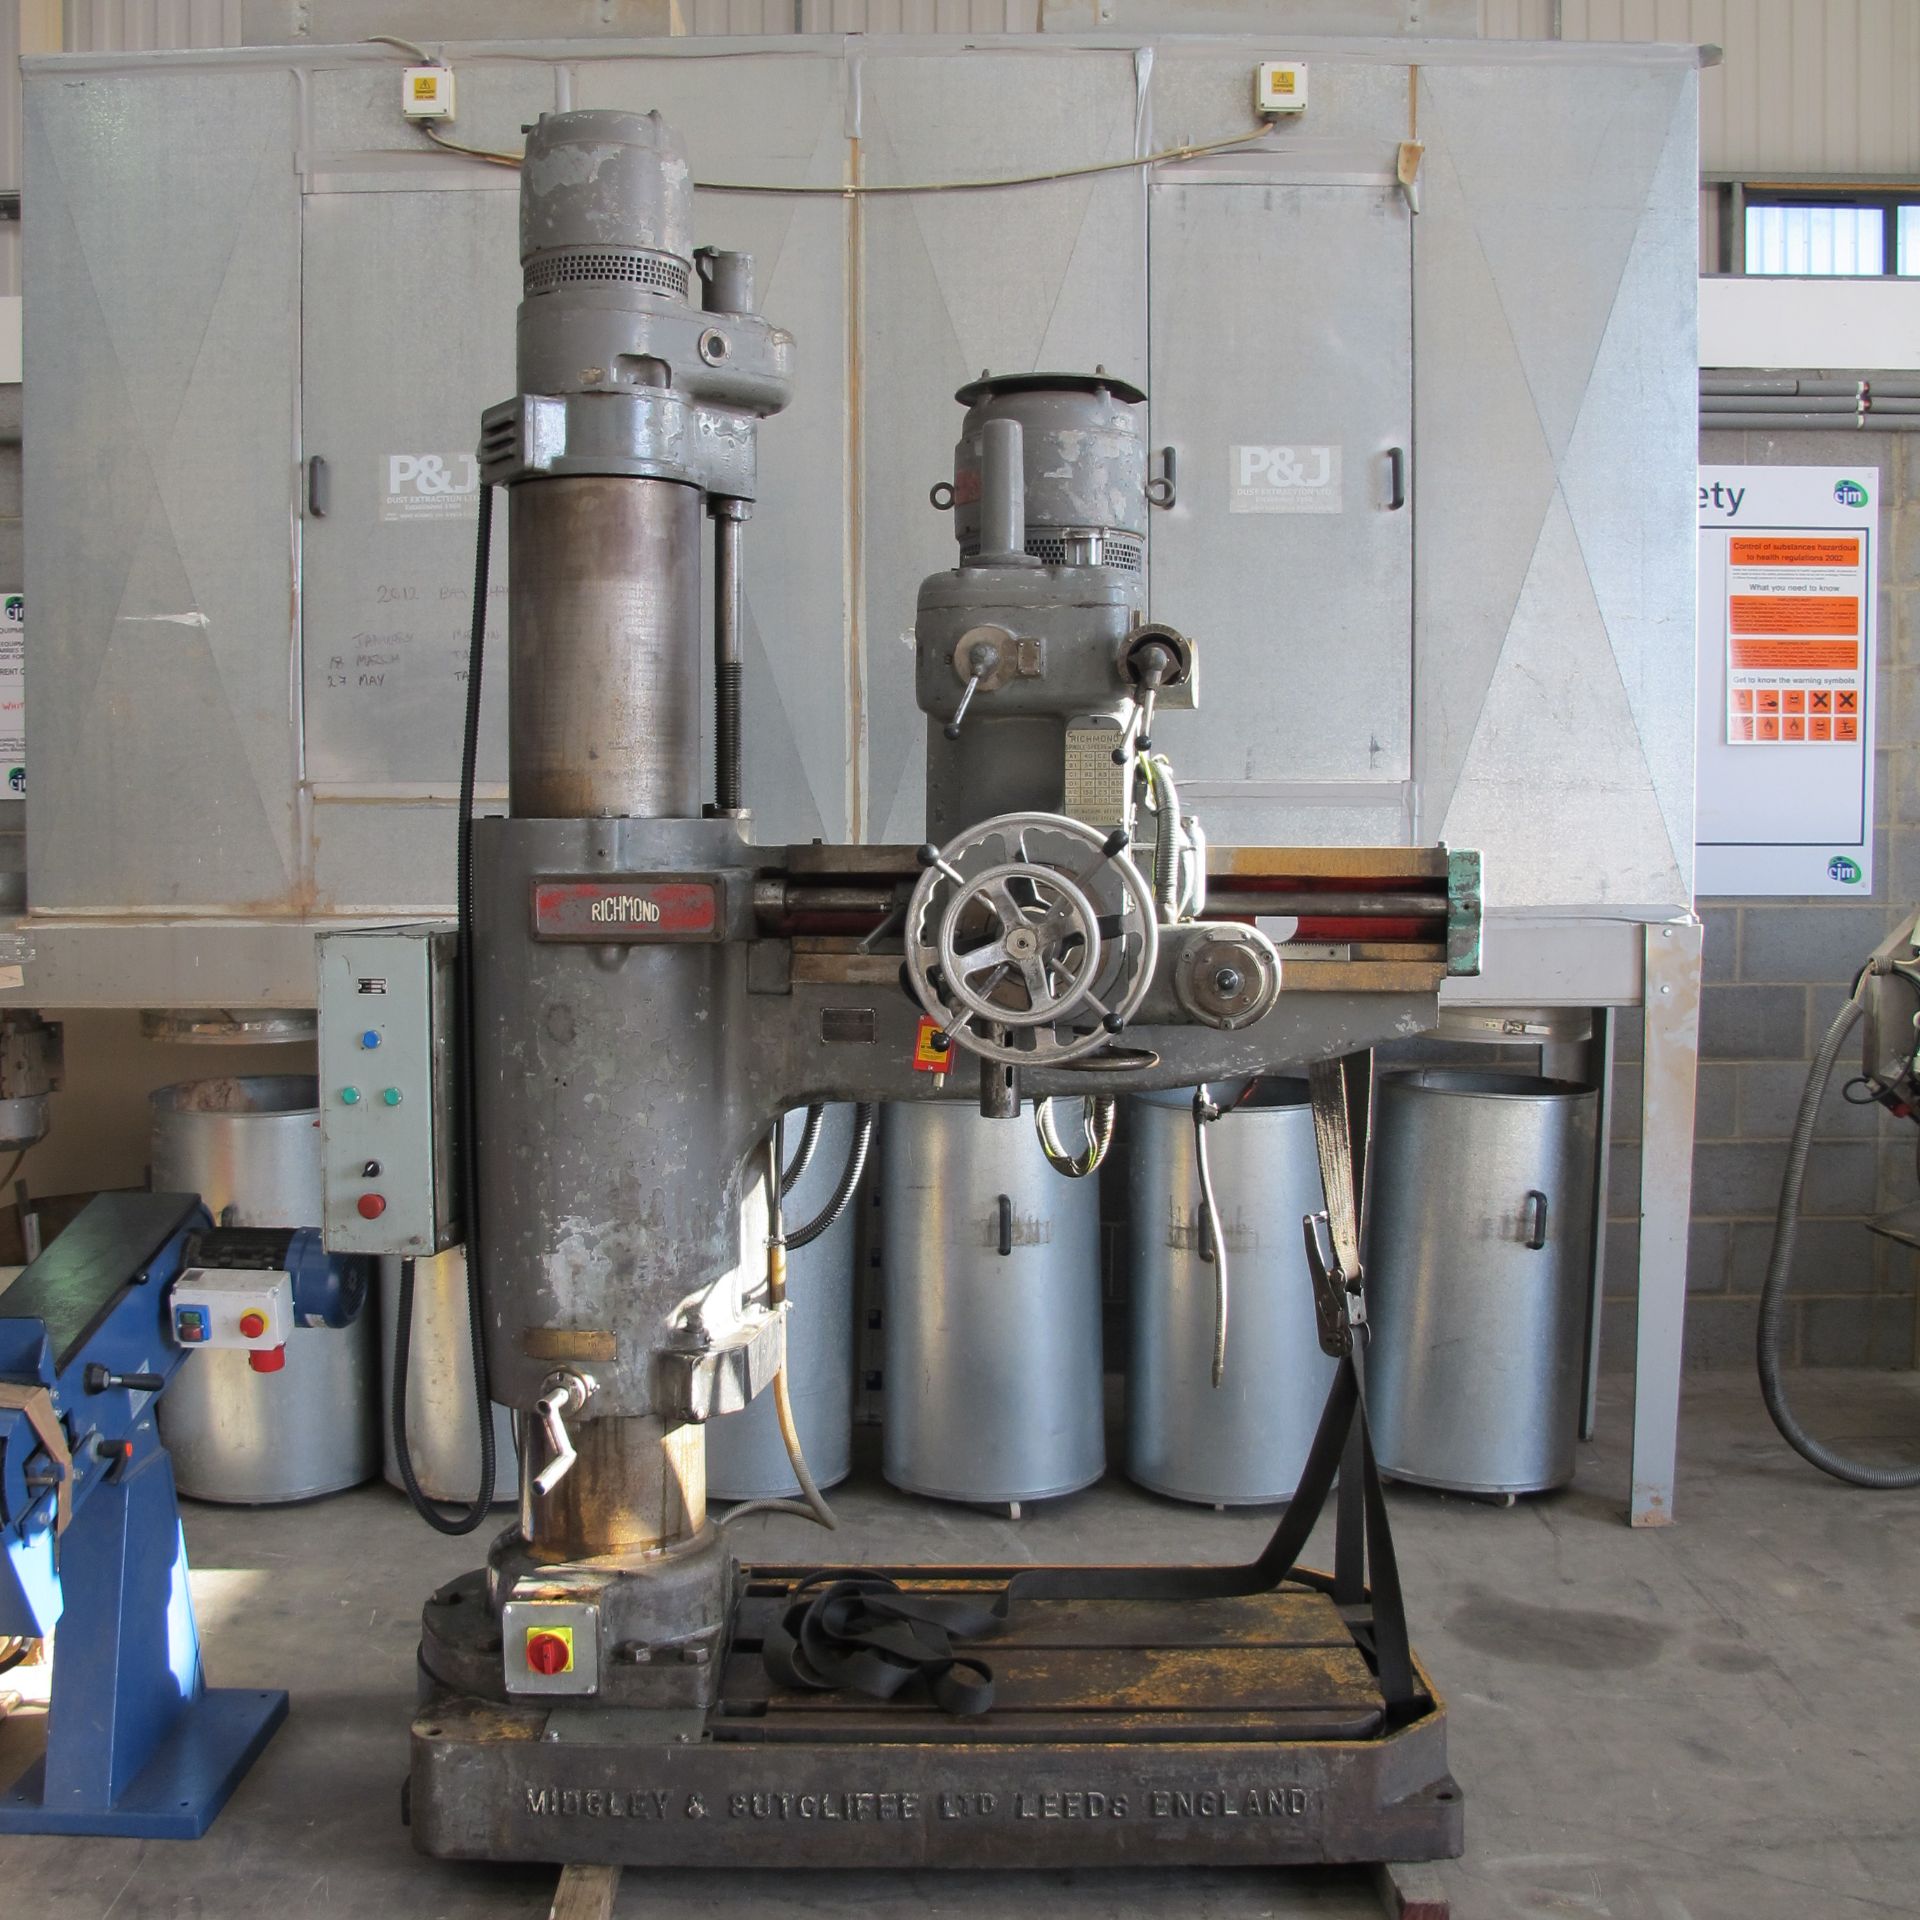 * Richmond Radial Arm Drill; 3' beam; 3 phase; serial number 2490P19. Please note there is a £30 +